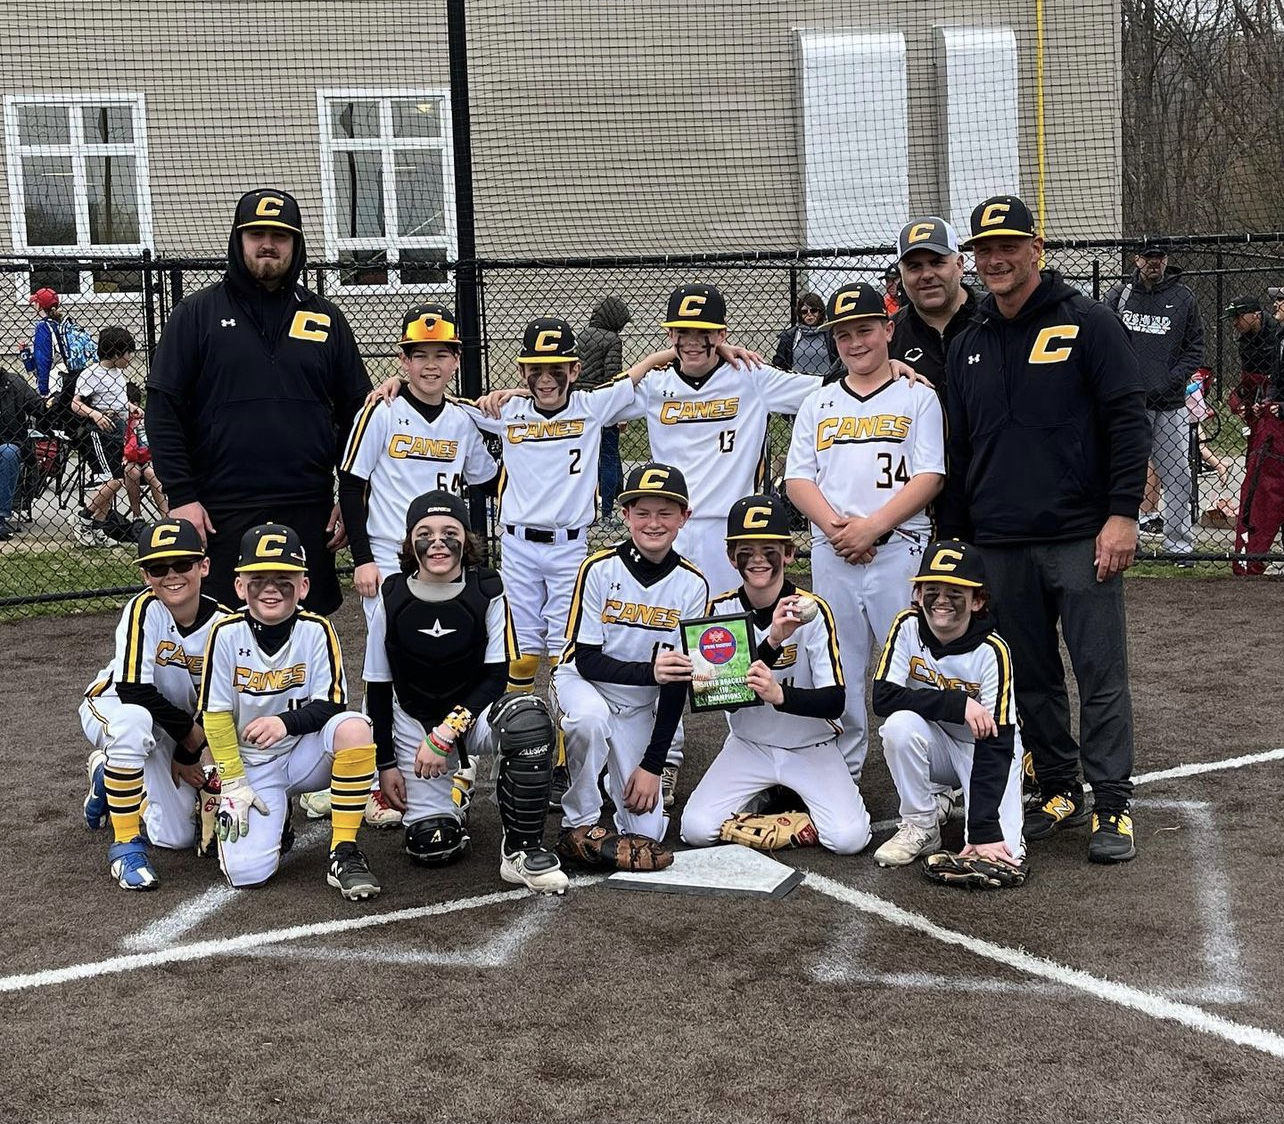 11U Canes win the Select Baseball Under Armour Spring Shootout Division